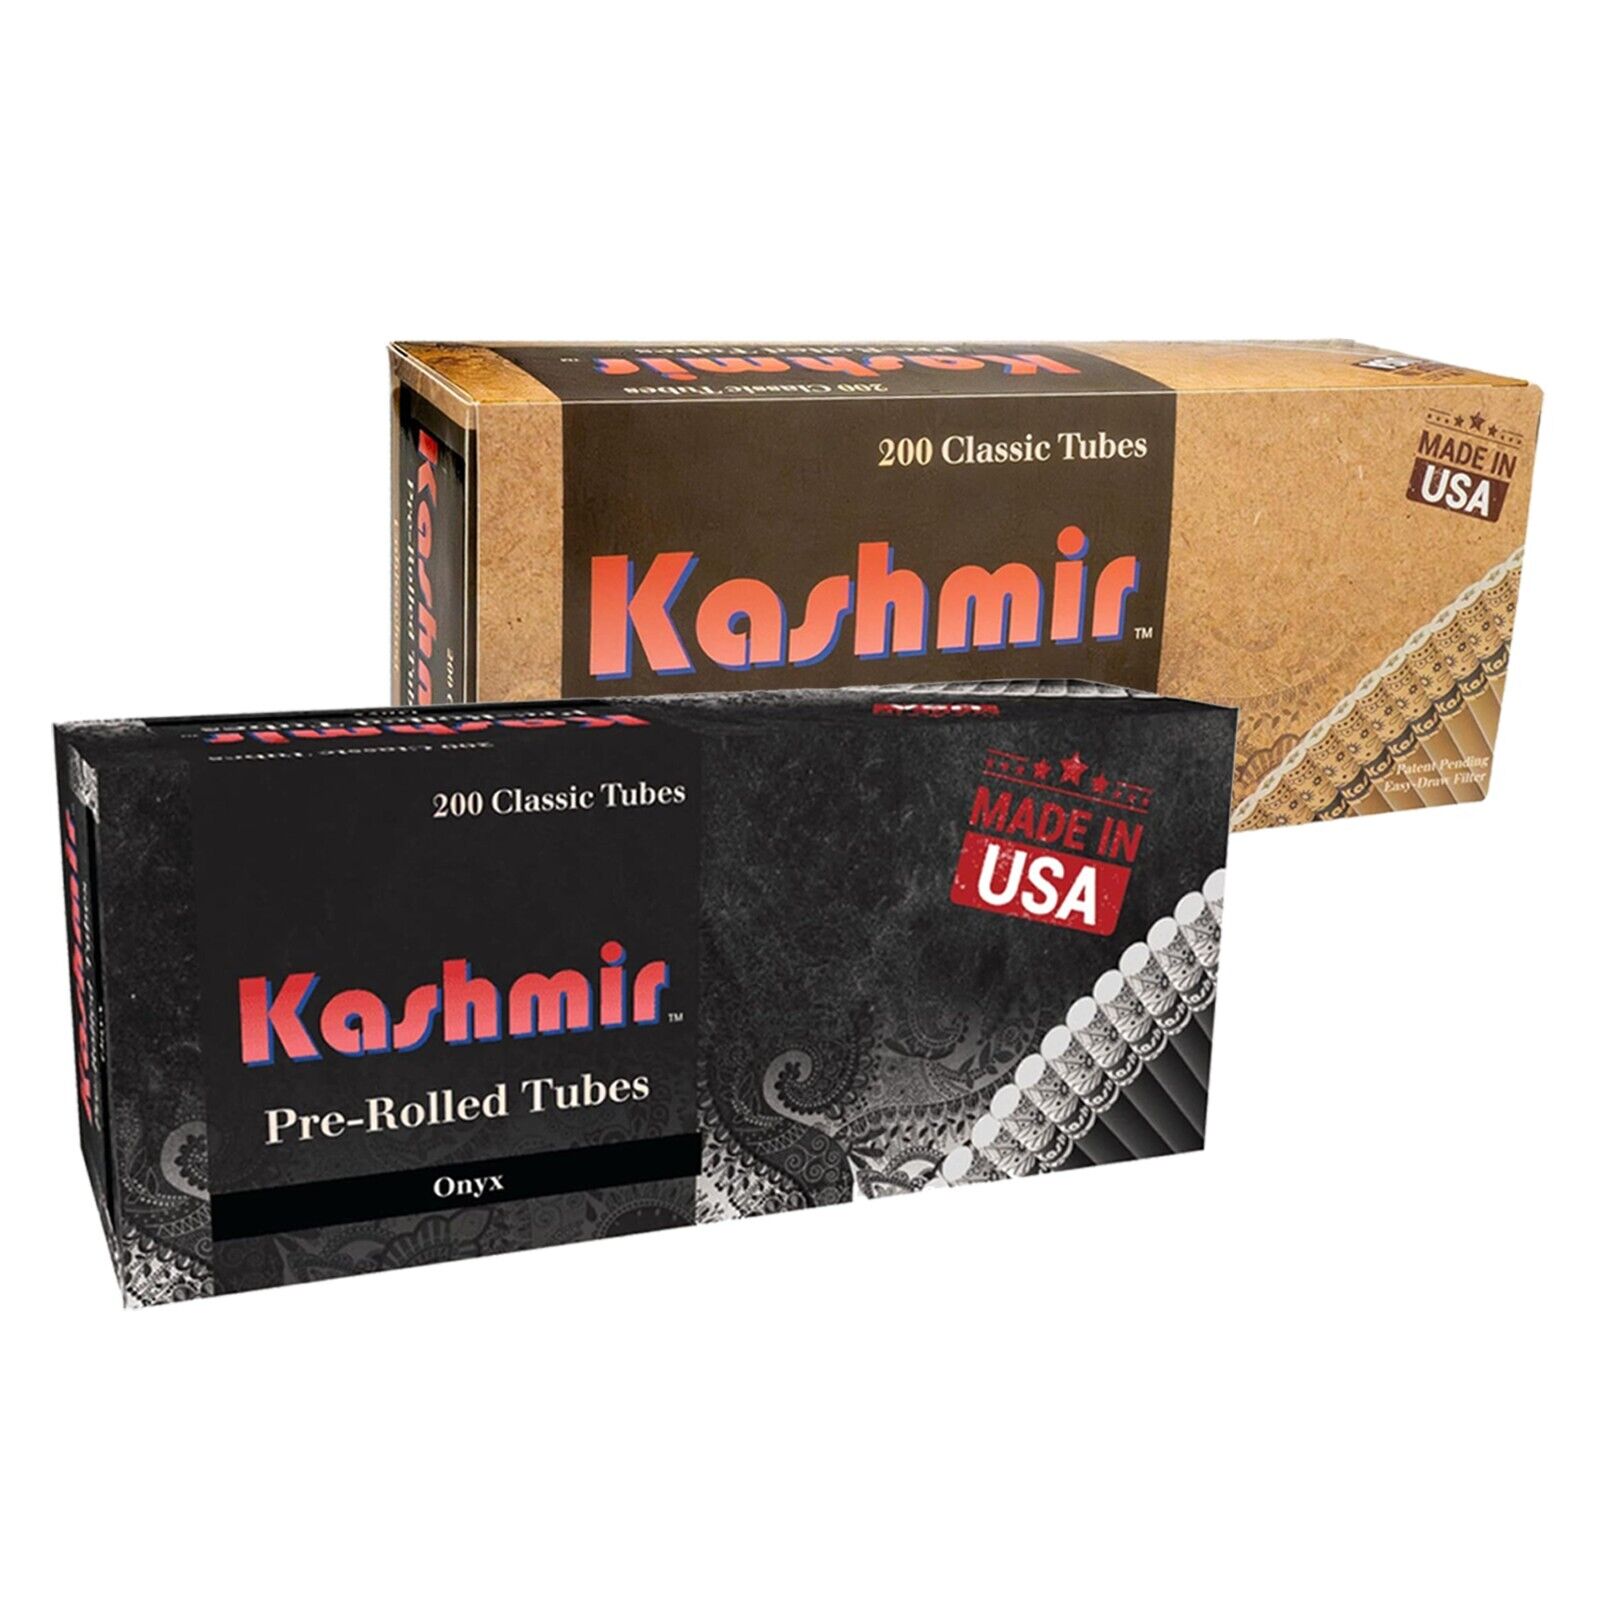 Kashmir Pre-Rolled Tubes Combo Pack of Onyx & Unbleached Cigarette Tubes: 400 Ct